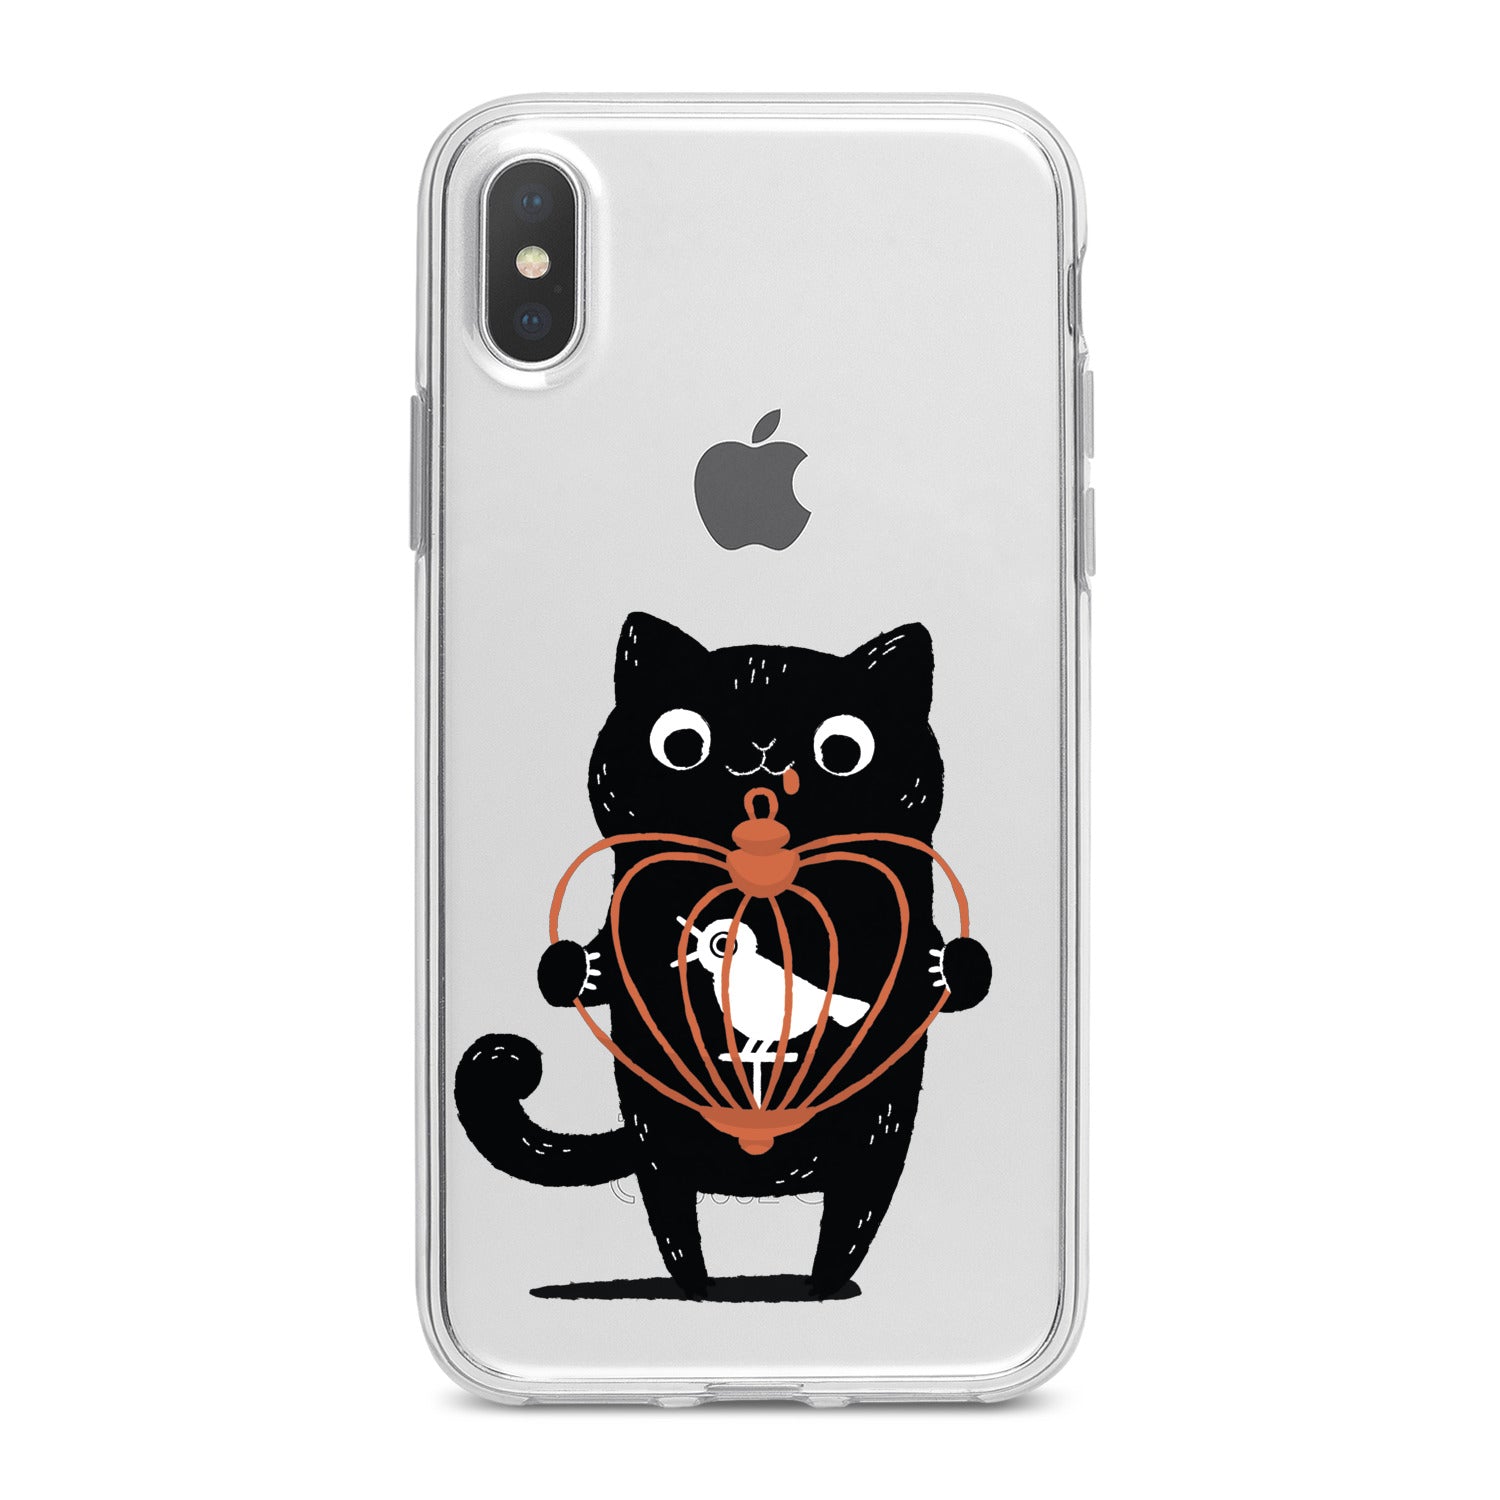 Lex Altern Feline Bird Pet Phone Case for your iPhone & Android phone.